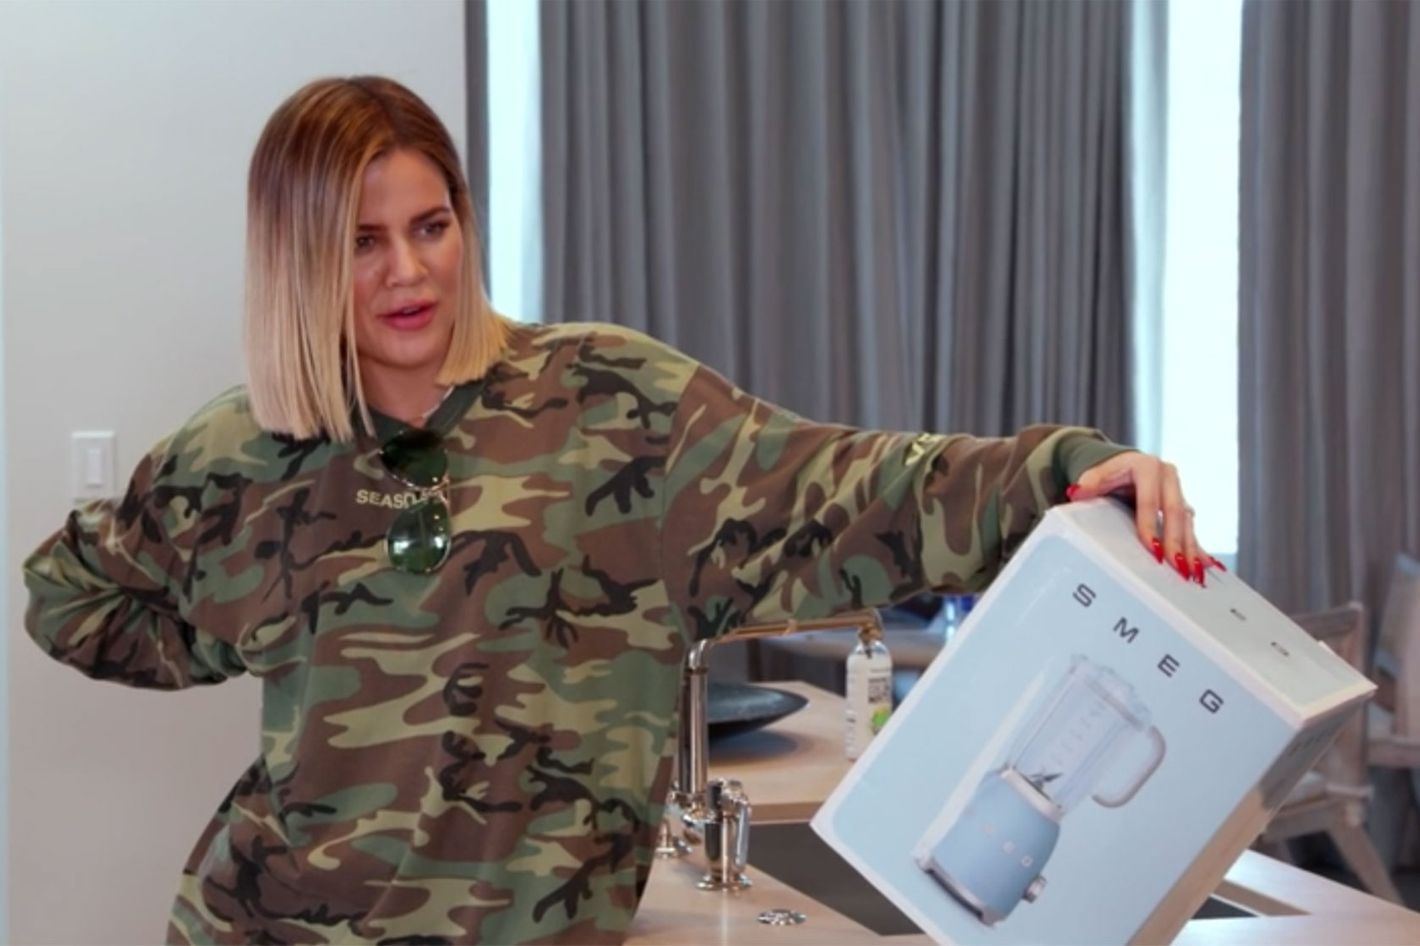 Kris Jenner becomes an Internet sensation as she shows off £12K 'rich as  f***' suitcase